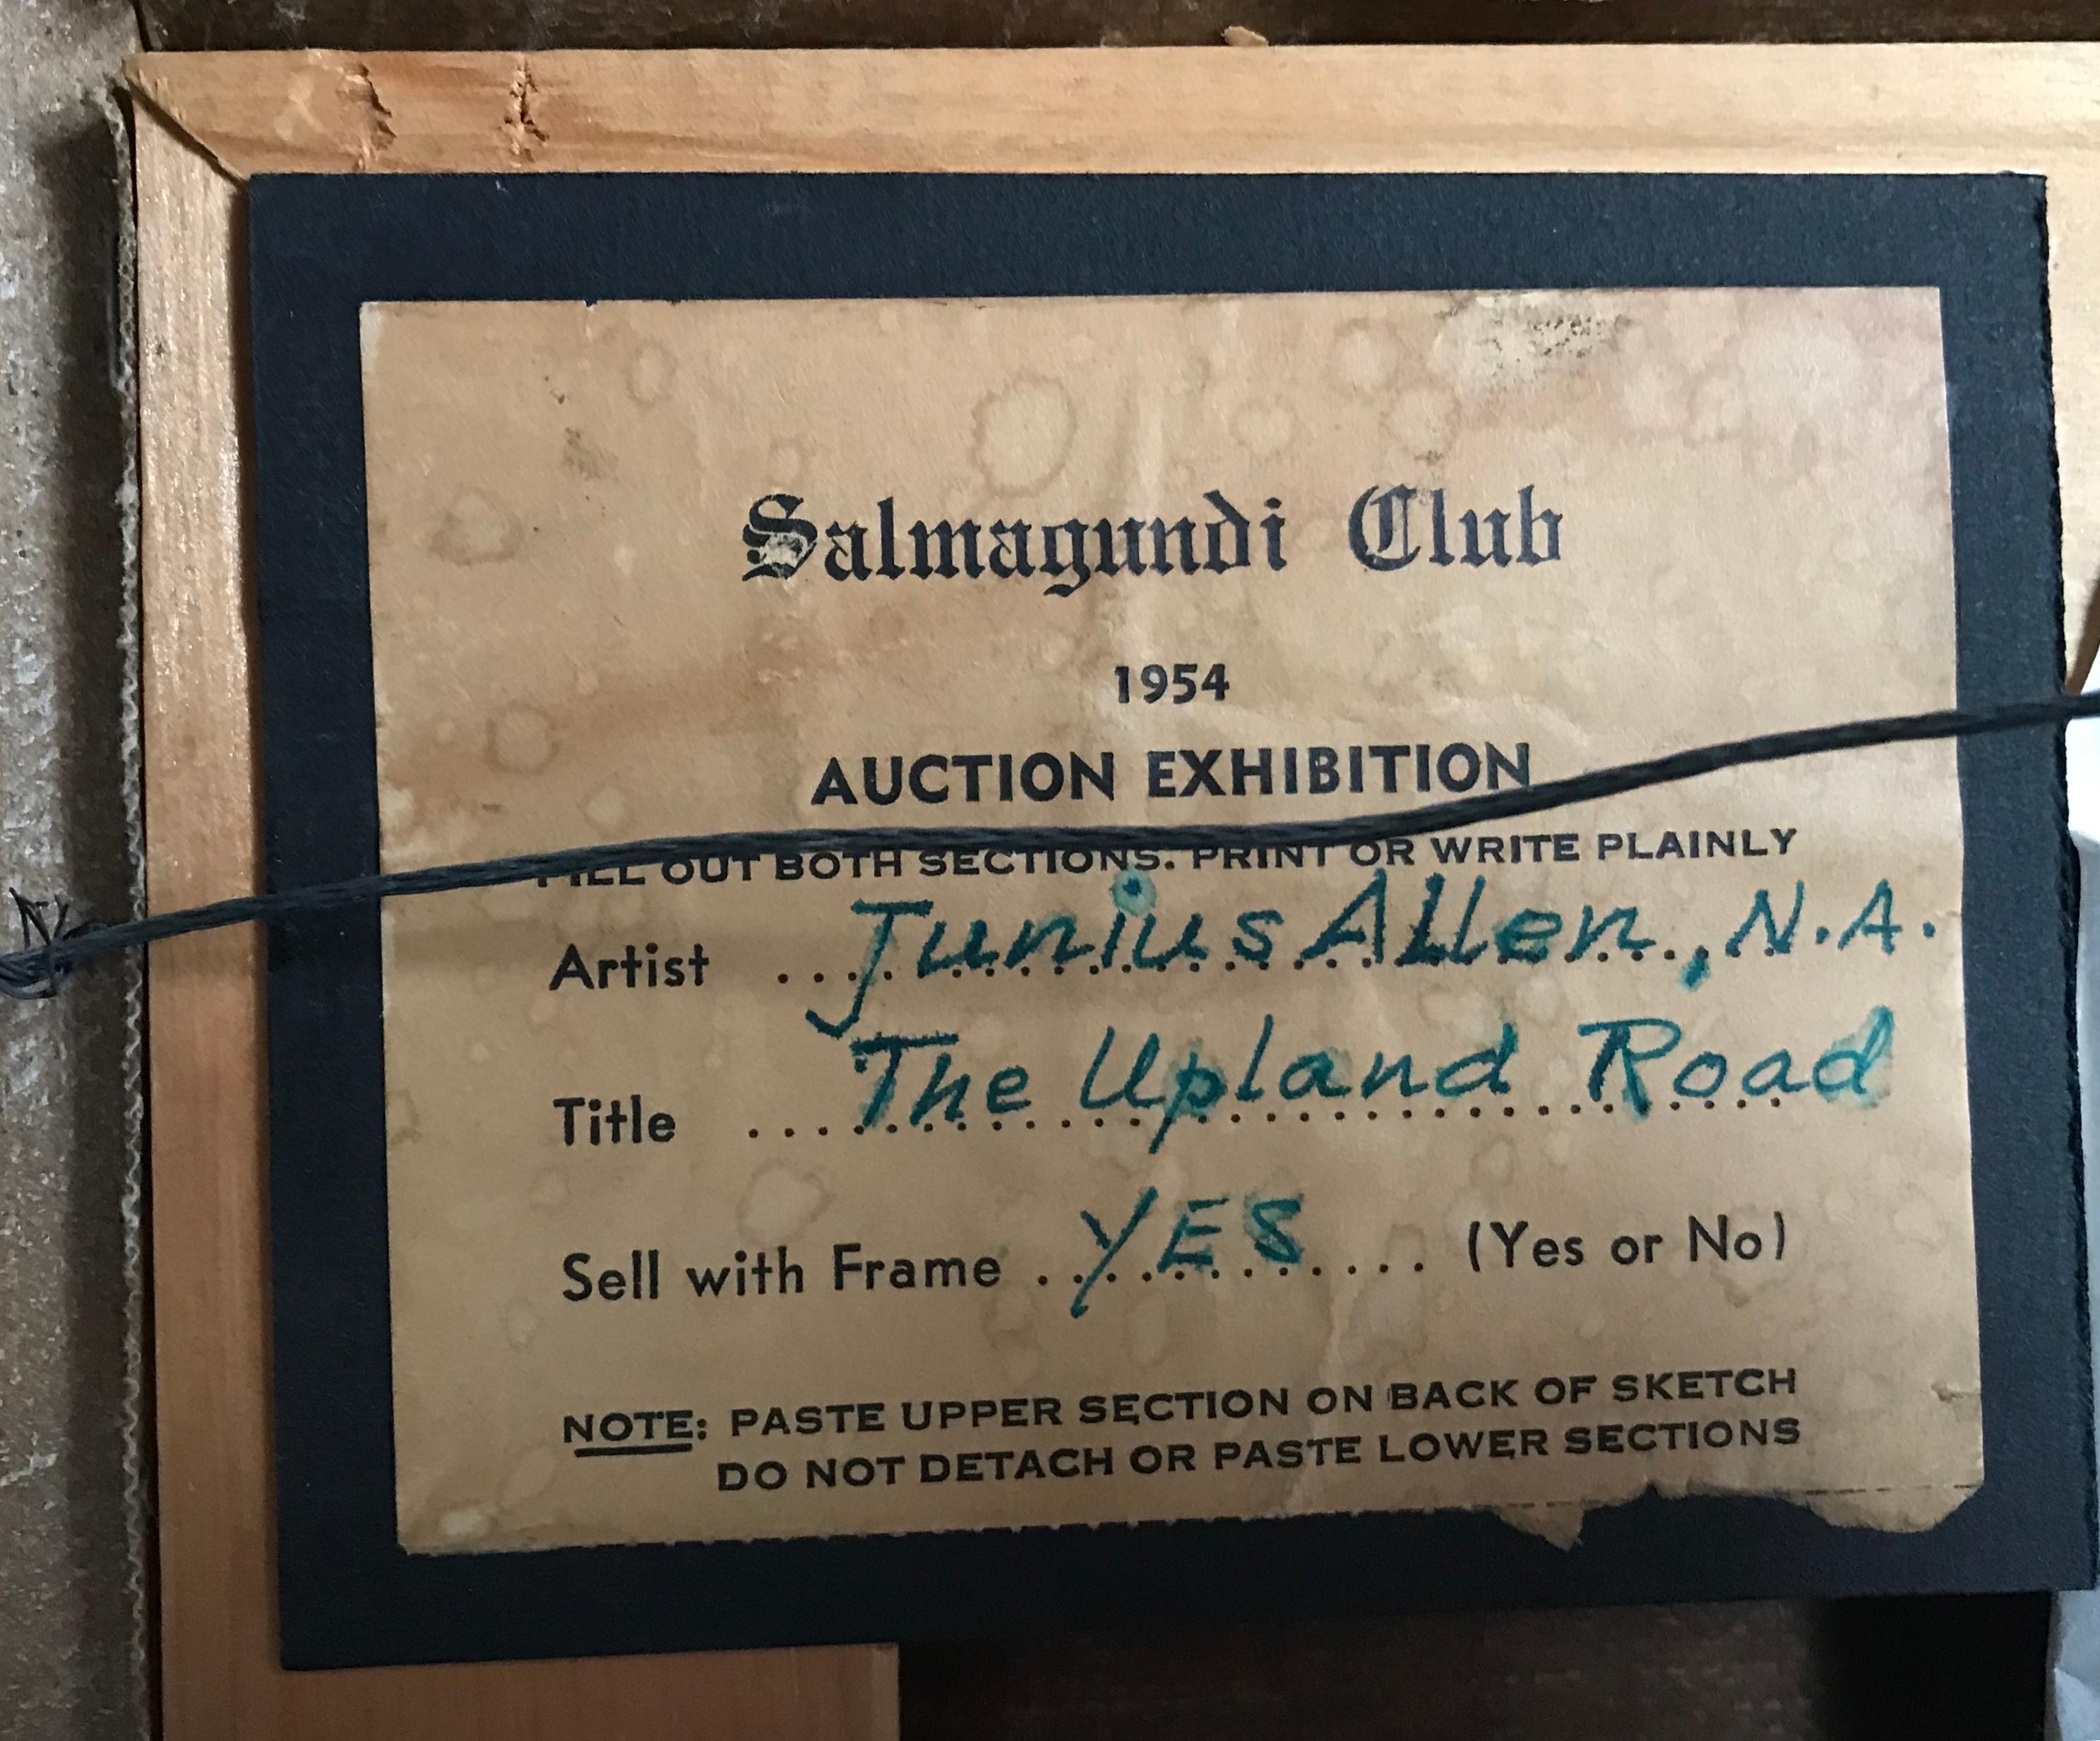 Junius Allen Salmagundi Club oil painting The Upland Road with Club label For Sale 4